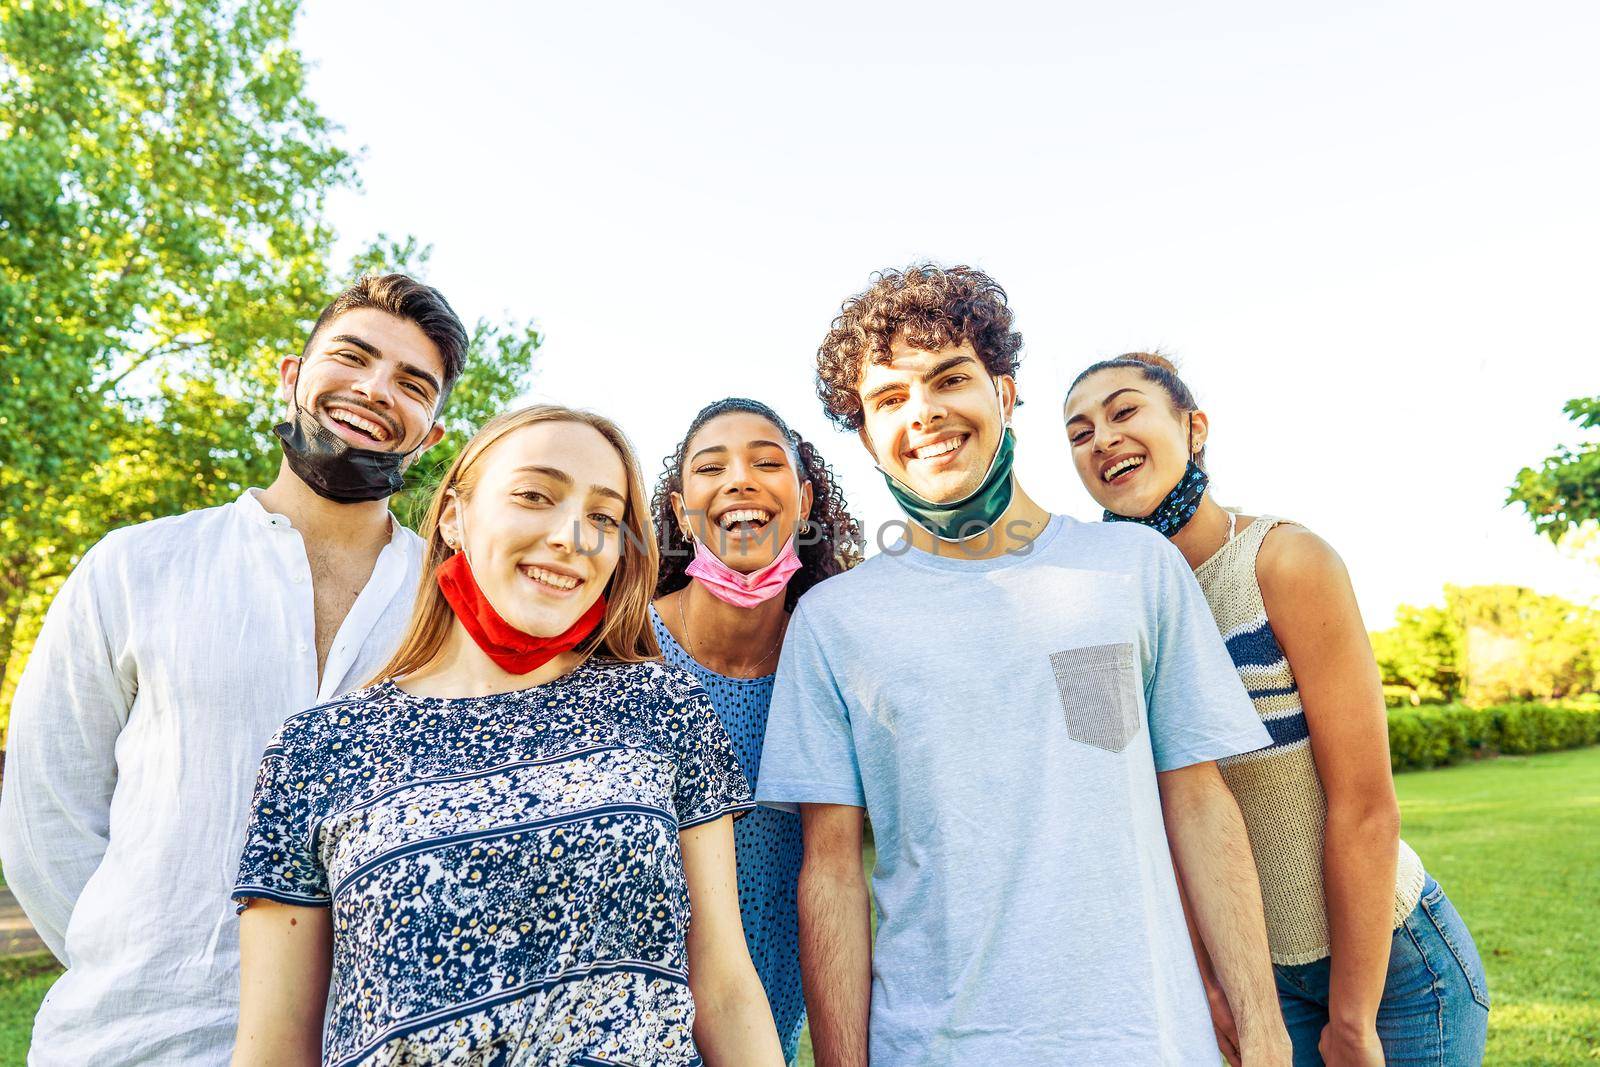 Happy carefree group of multiracial friends posing in a park for a portrait wearing lowered protective face mask so showing their beautiful smiles. Concept of happiness despite difficulties of life